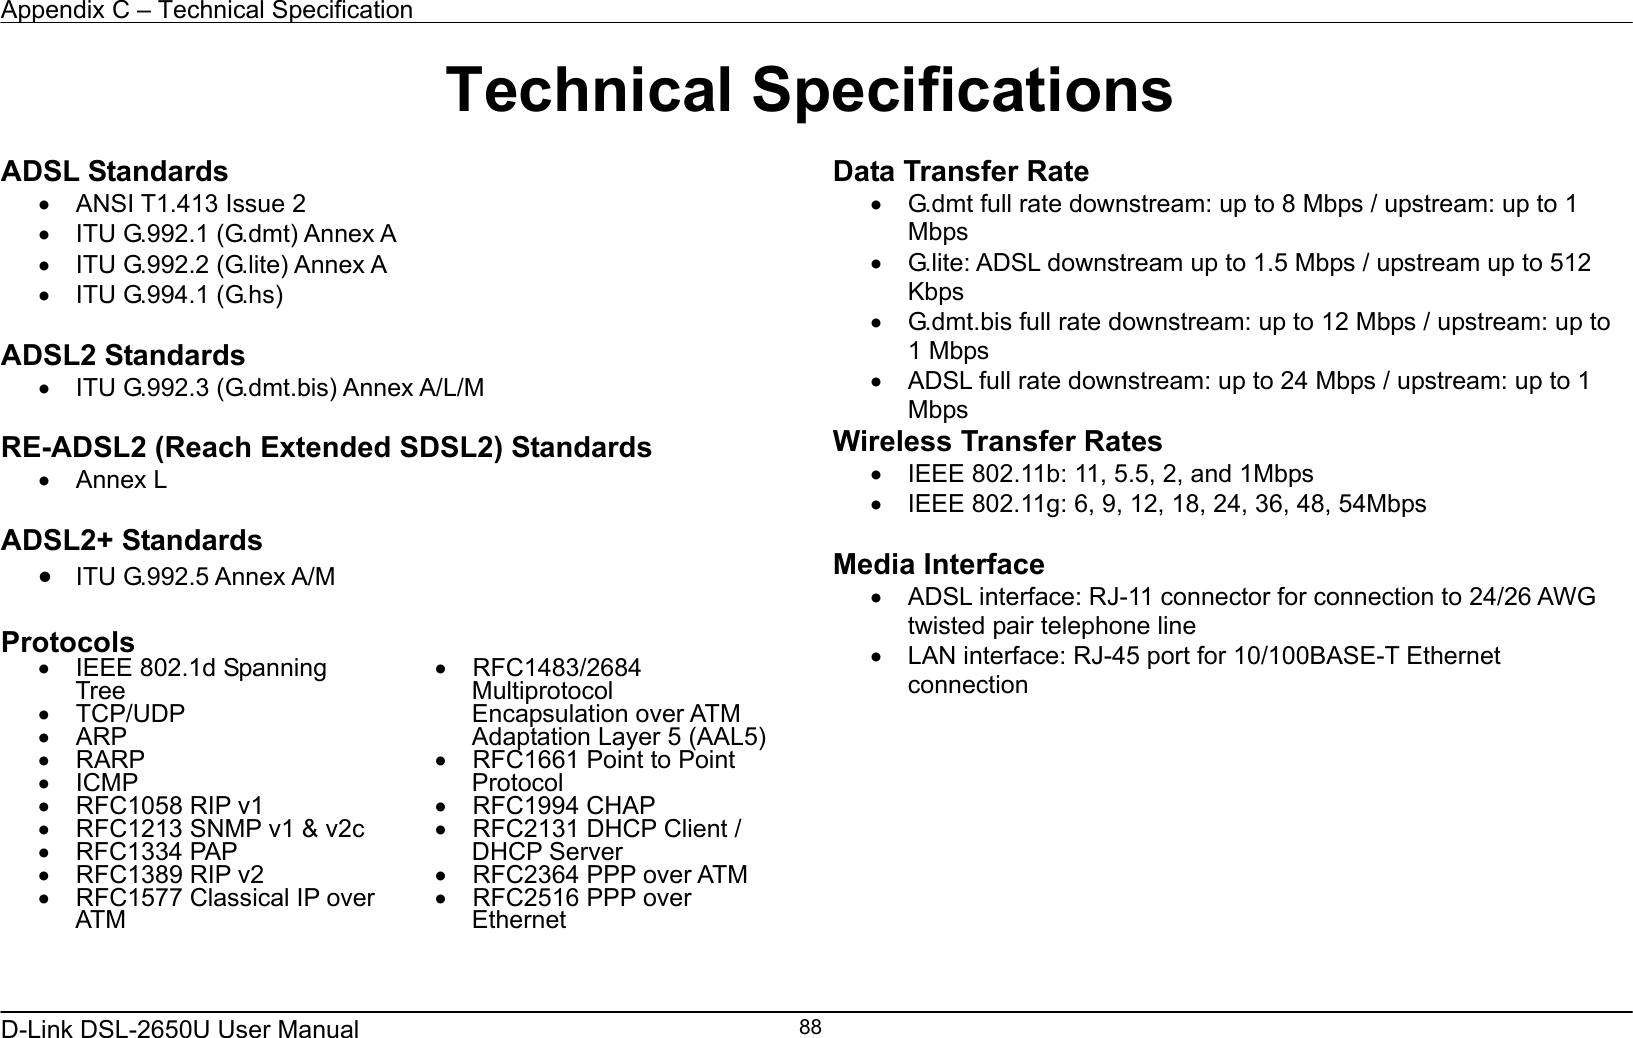 Appendix C – Technical Specification   D-Link DSL-2650U User Manual    88Technical Specifications ADSL Standards •  ANSI T1.413 Issue 2 •  ITU G.992.1 (G.dmt) Annex A   •  ITU G.992.2 (G.lite) Annex A •  ITU G.994.1 (G.hs)  ADSL2 Standards •  ITU G.992.3 (G.dmt.bis) Annex A/L/M  RE-ADSL2 (Reach Extended SDSL2) Standards •  Annex L  ADSL2+ Standards •  ITU G.992.5 Annex A/M  Protocols •  IEEE 802.1d Spanning Tree •  TCP/UDP •  ARP •  RARP •  ICMP •  RFC1058 RIP v1 •  RFC1213 SNMP v1 &amp; v2c •  RFC1334 PAP •  RFC1389 RIP v2 •  RFC1577 Classical IP over ATM •  RFC1483/2684 Multiprotocol Encapsulation over ATM Adaptation Layer 5 (AAL5) •  RFC1661 Point to Point Protocol •  RFC1994 CHAP •  RFC2131 DHCP Client / DHCP Server •  RFC2364 PPP over ATM •  RFC2516 PPP over Ethernet   Data Transfer Rate •  G.dmt full rate downstream: up to 8 Mbps / upstream: up to 1 Mbps •  G.lite: ADSL downstream up to 1.5 Mbps / upstream up to 512 Kbps •  G.dmt.bis full rate downstream: up to 12 Mbps / upstream: up to 1 Mbps •  ADSL full rate downstream: up to 24 Mbps / upstream: up to 1 Mbps Wireless Transfer Rates •  IEEE 802.11b: 11, 5.5, 2, and 1Mbps •  IEEE 802.11g: 6, 9, 12, 18, 24, 36, 48, 54Mbps  Media Interface •  ADSL interface: RJ-11 connector for connection to 24/26 AWG twisted pair telephone line •  LAN interface: RJ-45 port for 10/100BASE-T Ethernet connection 